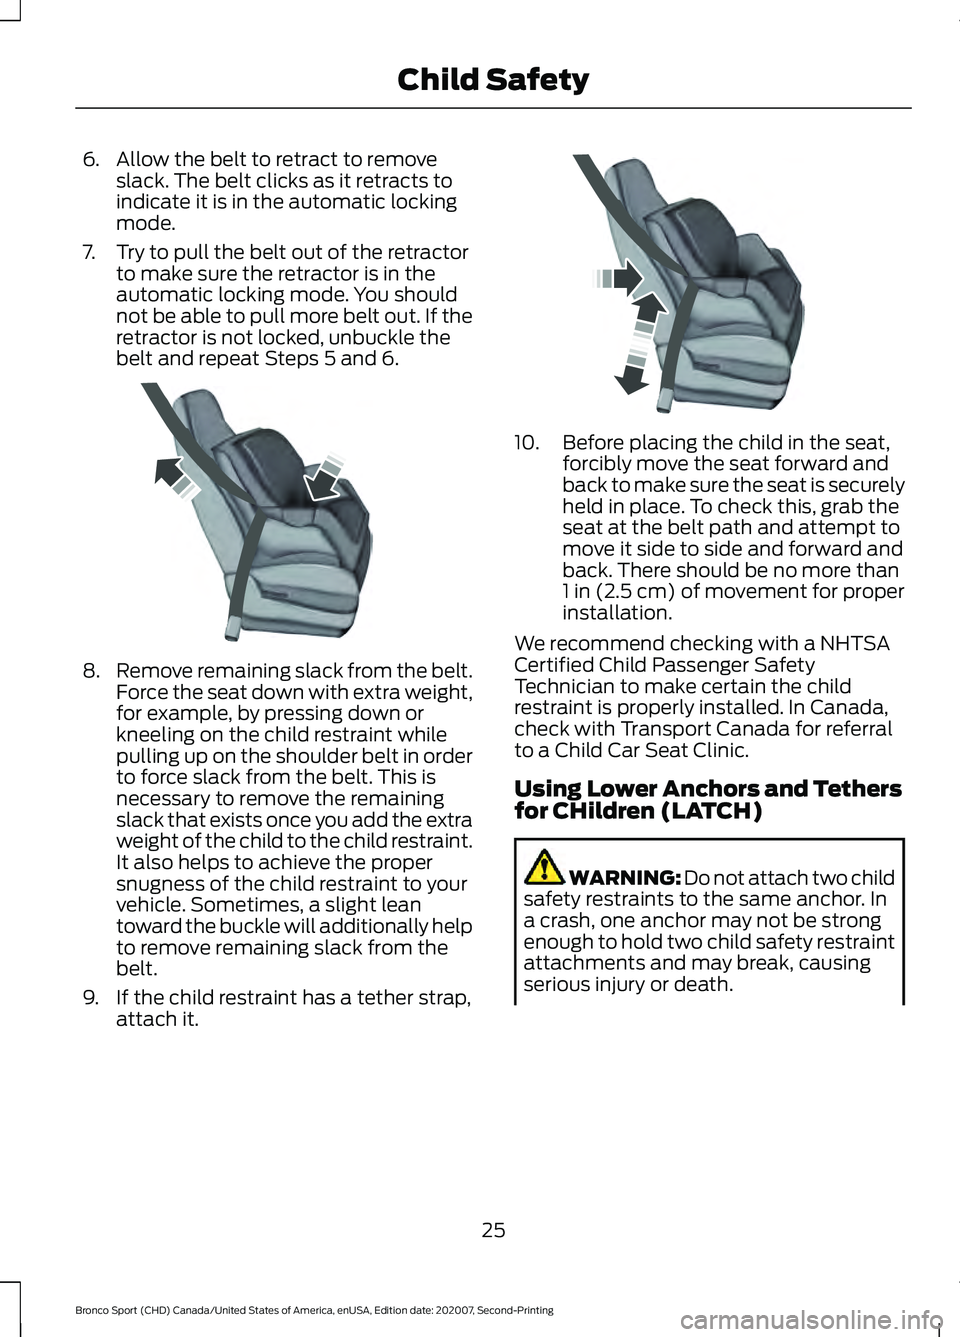 FORD BRONCO SPORT 2021  Owners Manual 6. Allow the belt to retract to remove
slack. The belt clicks as it retracts to
indicate it is in the automatic locking
mode.
7. Try to pull the belt out of the retractor to make sure the retractor is